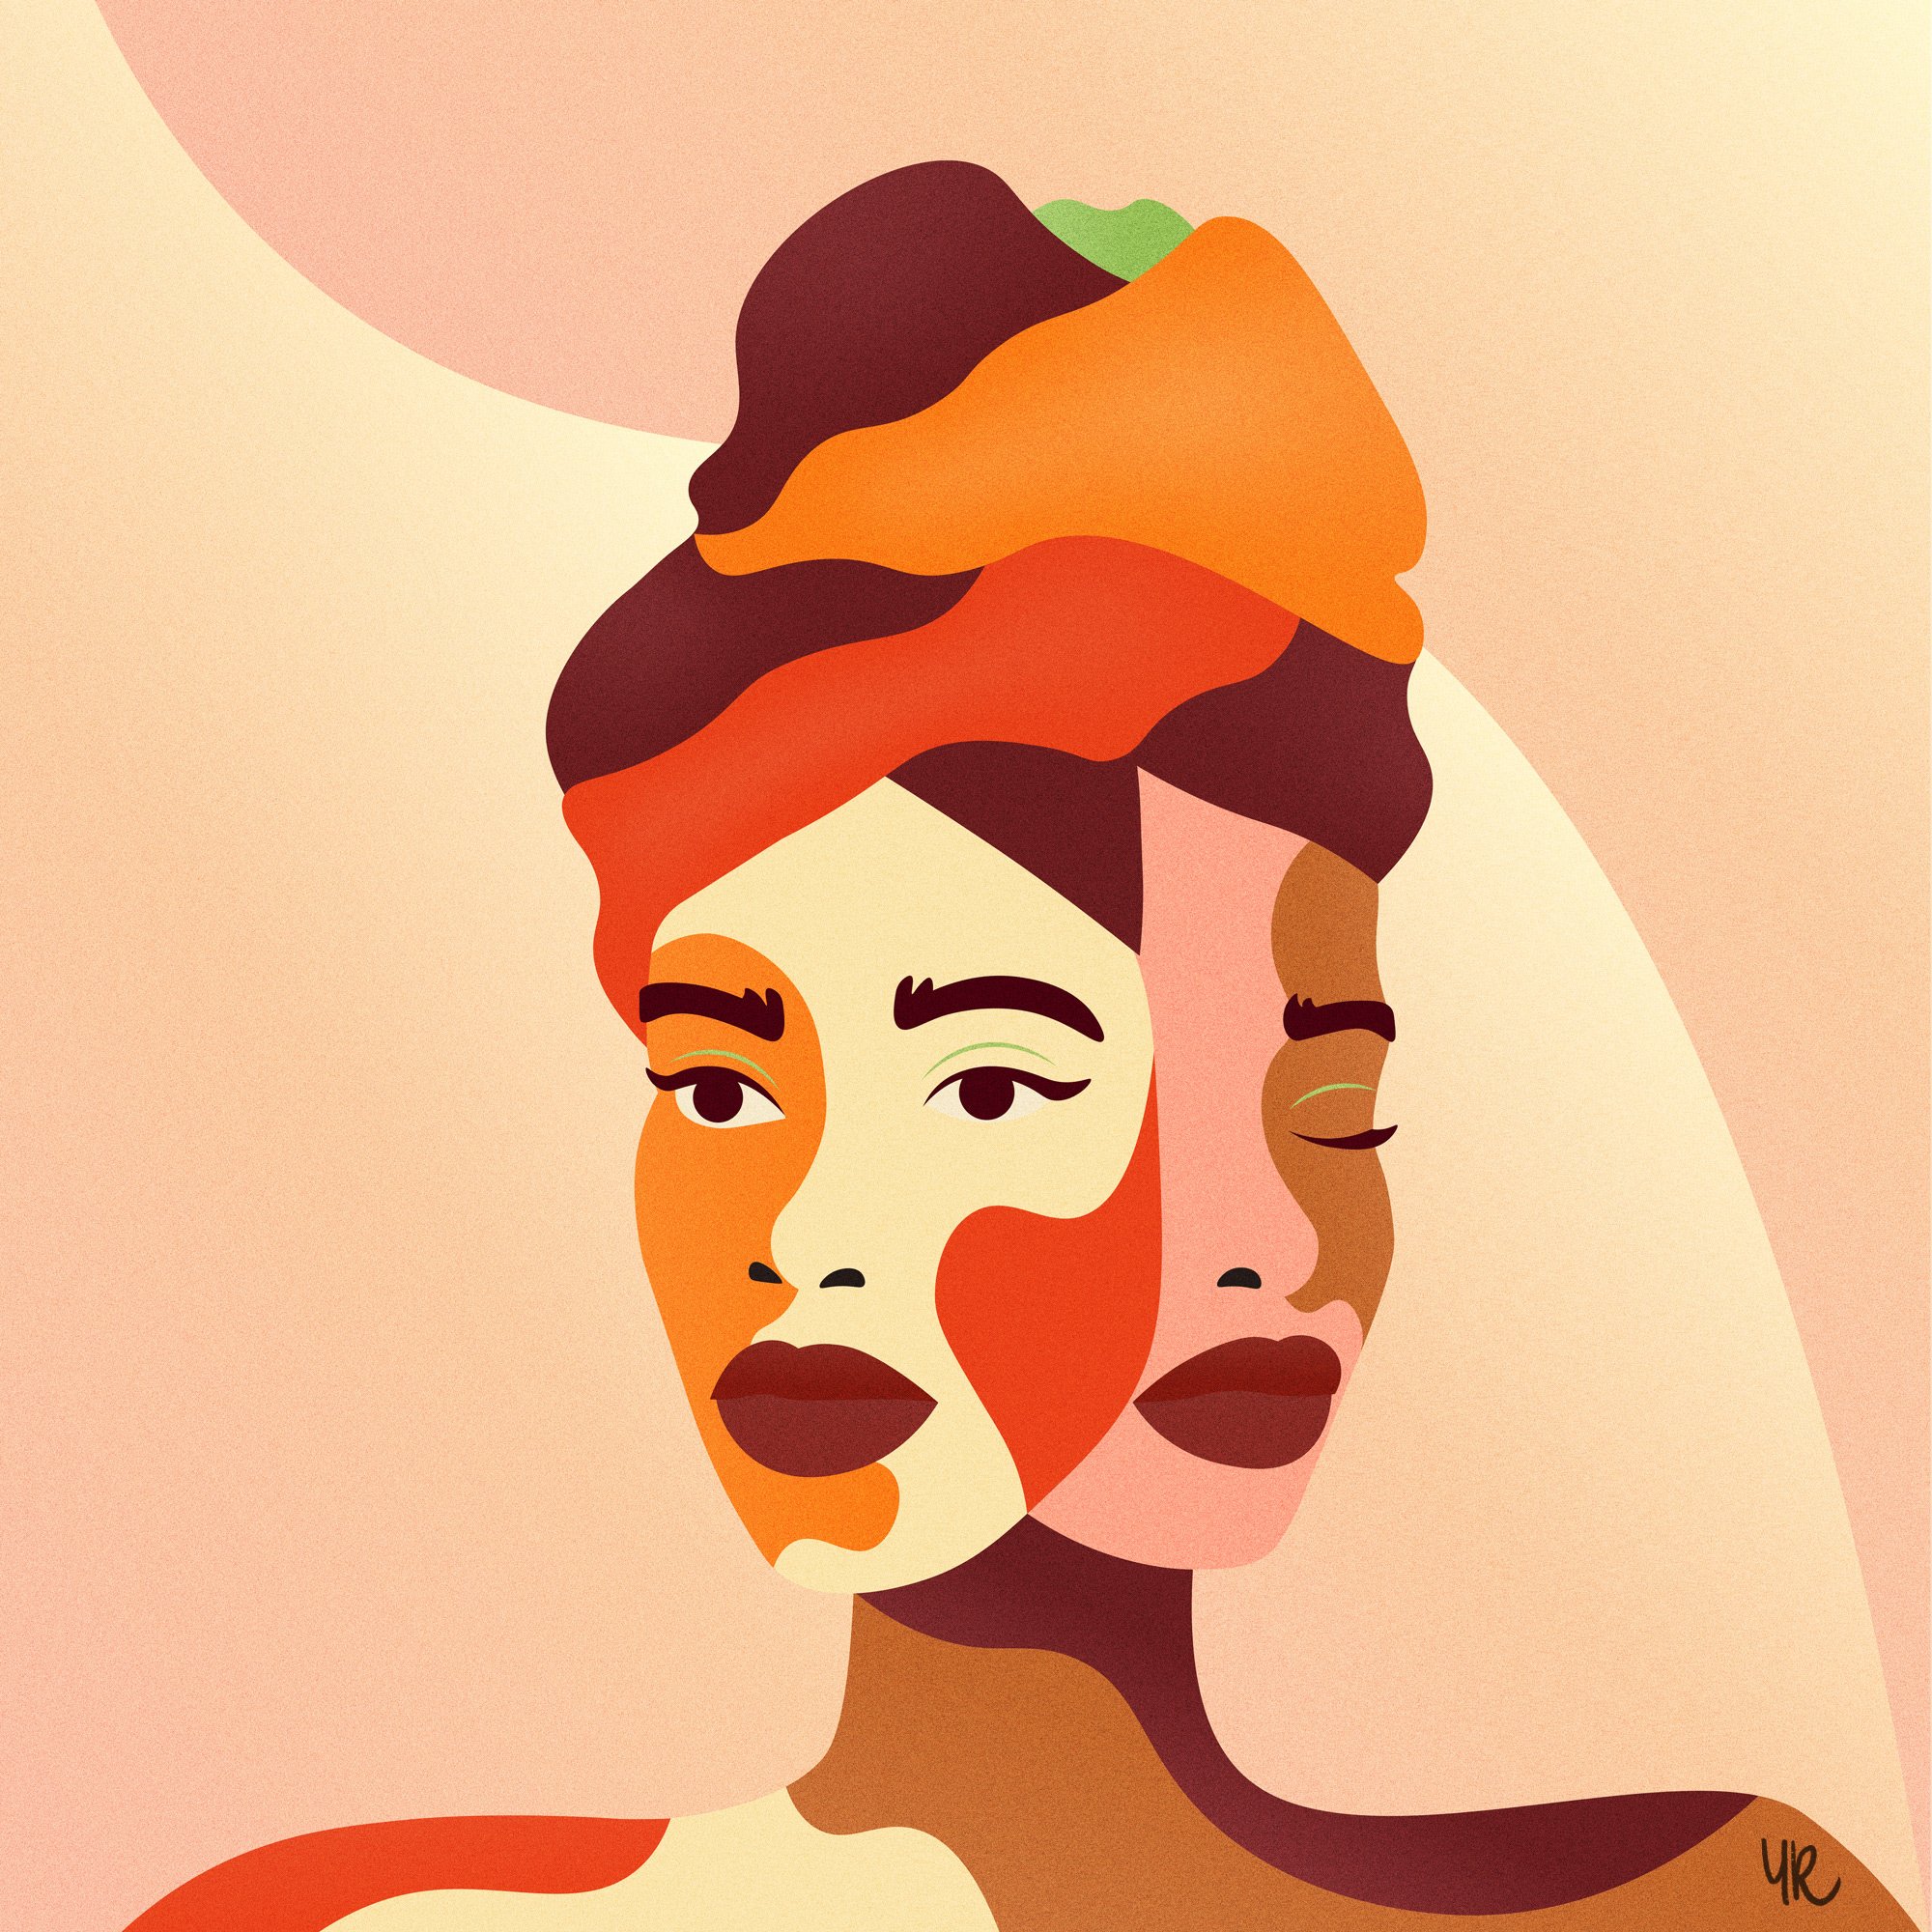 a piece of art showing a woman with two faces in colours such as orange and red and brown. This is the first ever NFT by World of Women artist